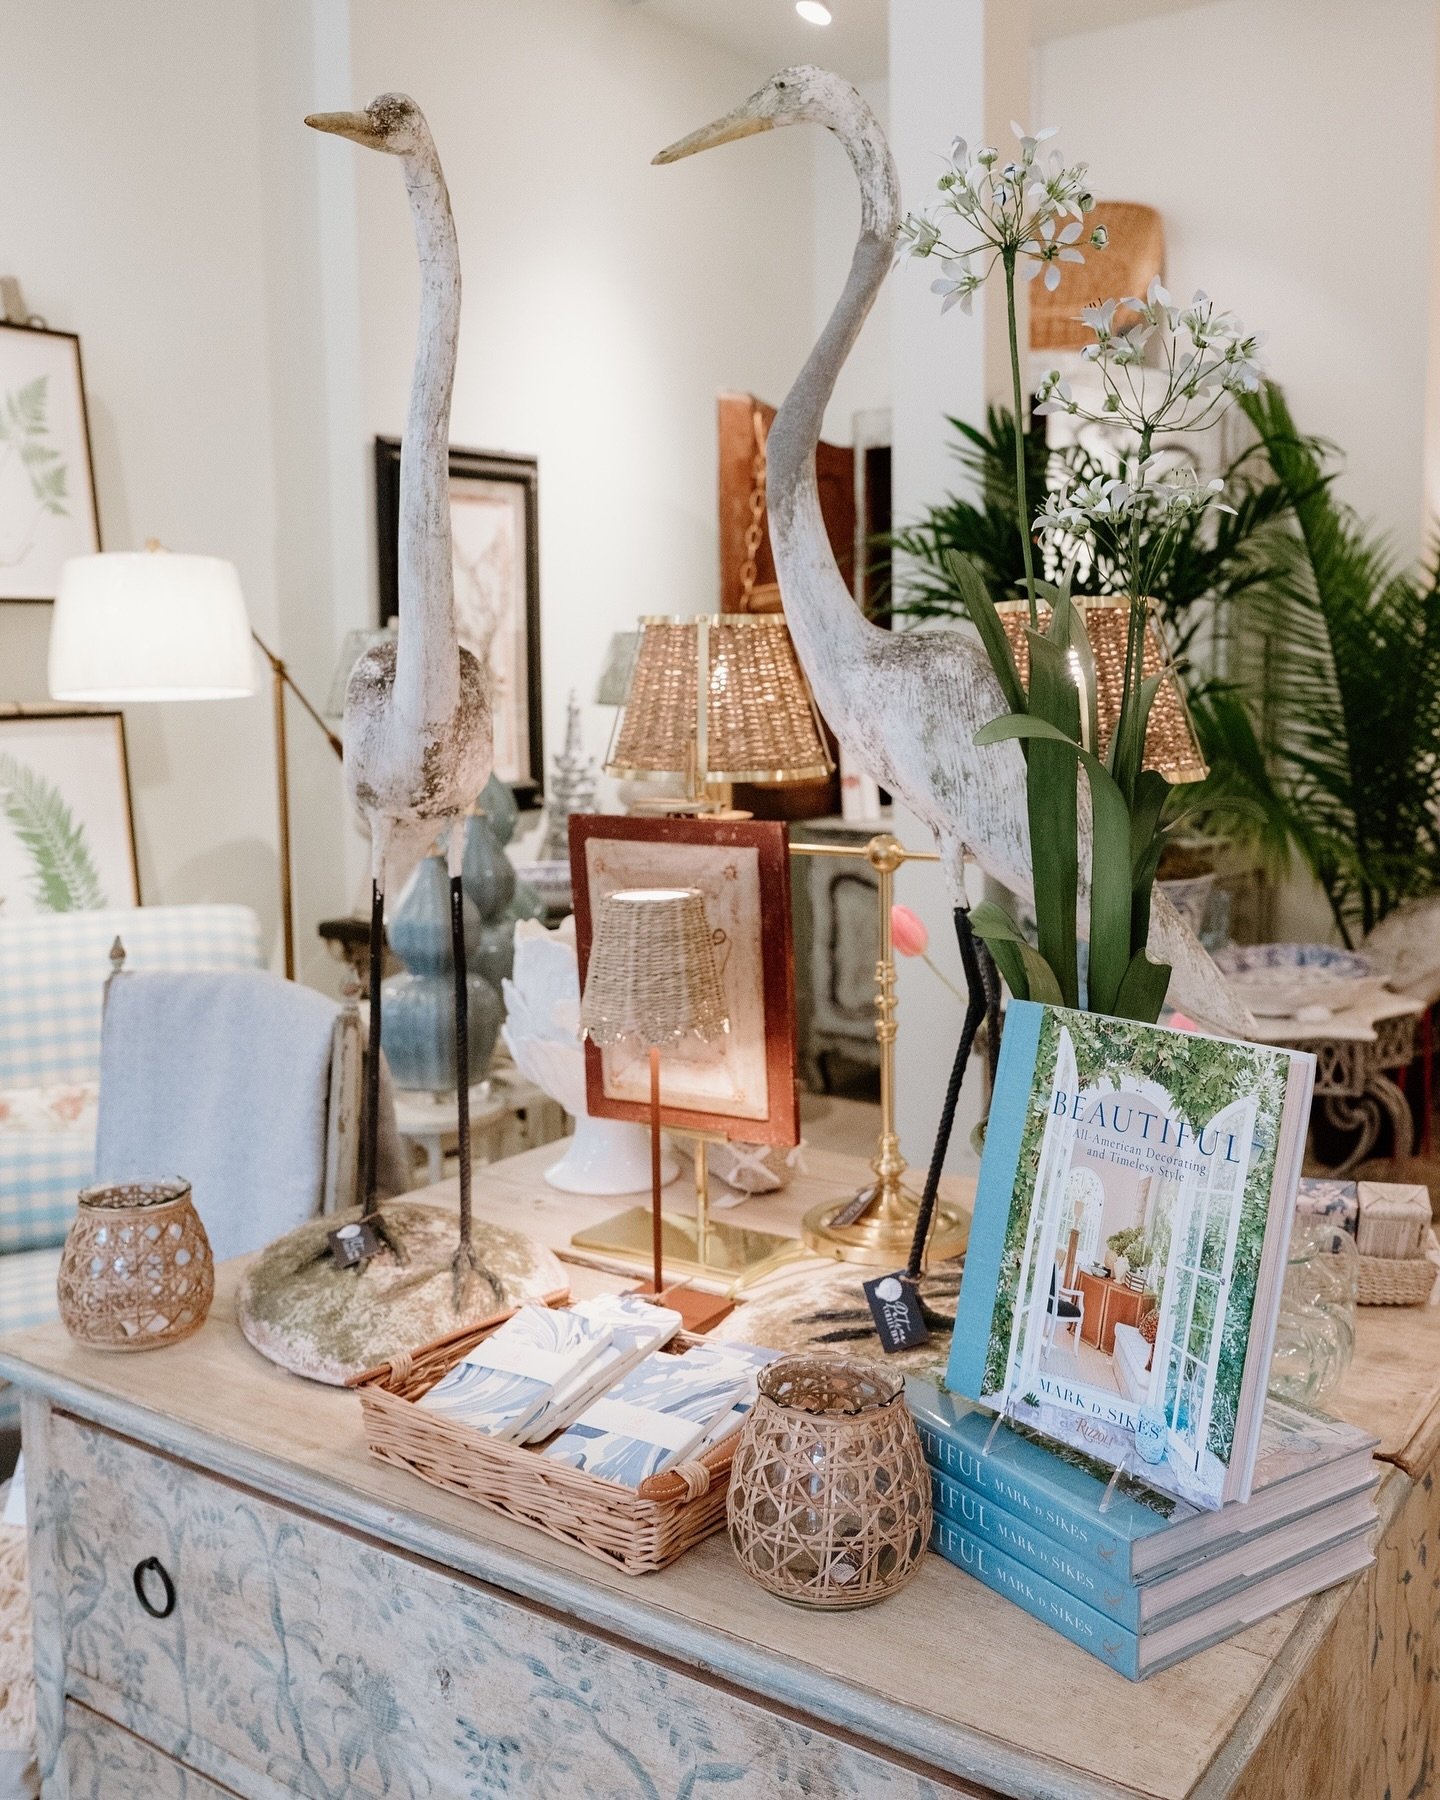 From candles, to concrete birds, to antique cabinets &mdash; Patina truly has it ALL 😍 We are your go-to shop in Naples and Chicago for gifts, home decor, or any Italian inspiration🤍